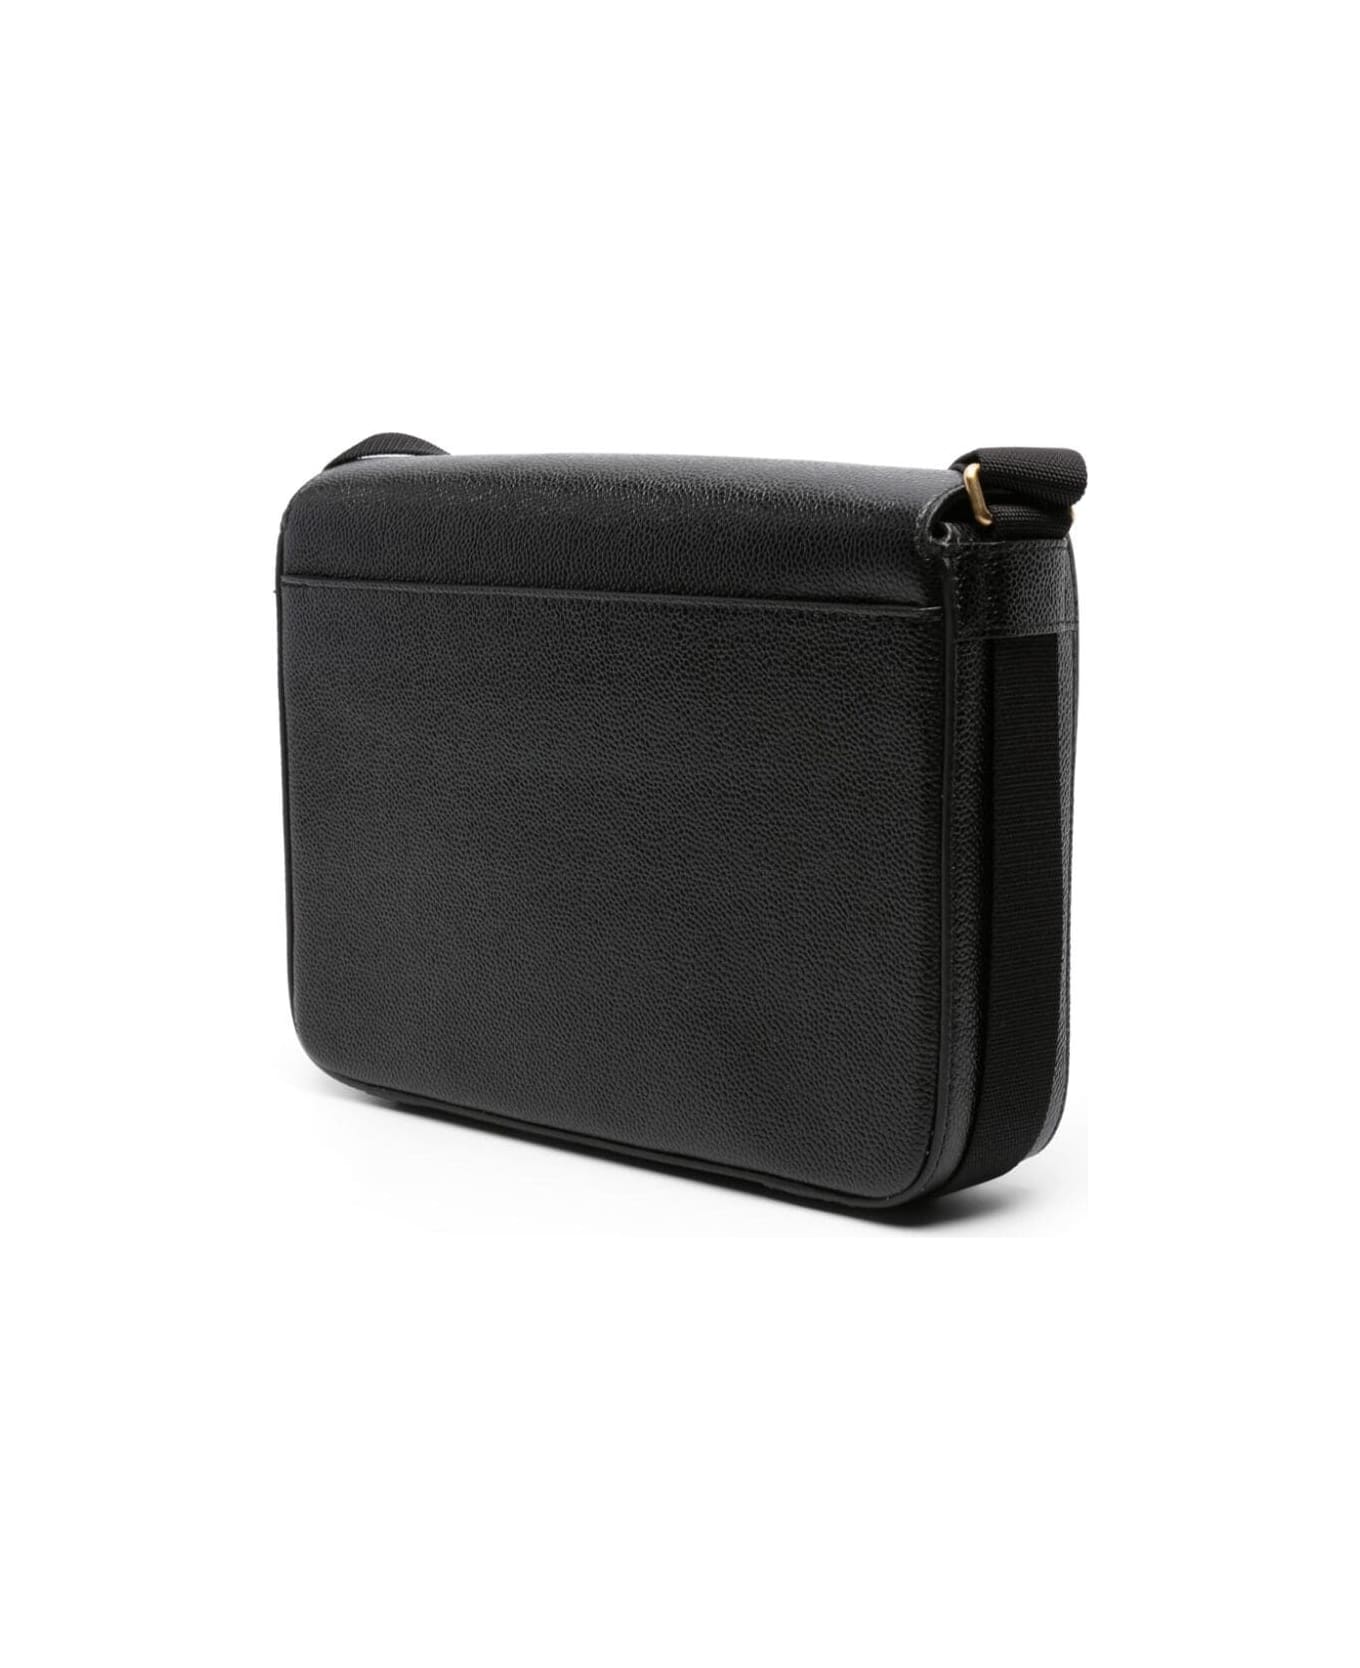 Thom Browne Reporter Bag With Webbing Strap In Pebble Grain Leather - Black